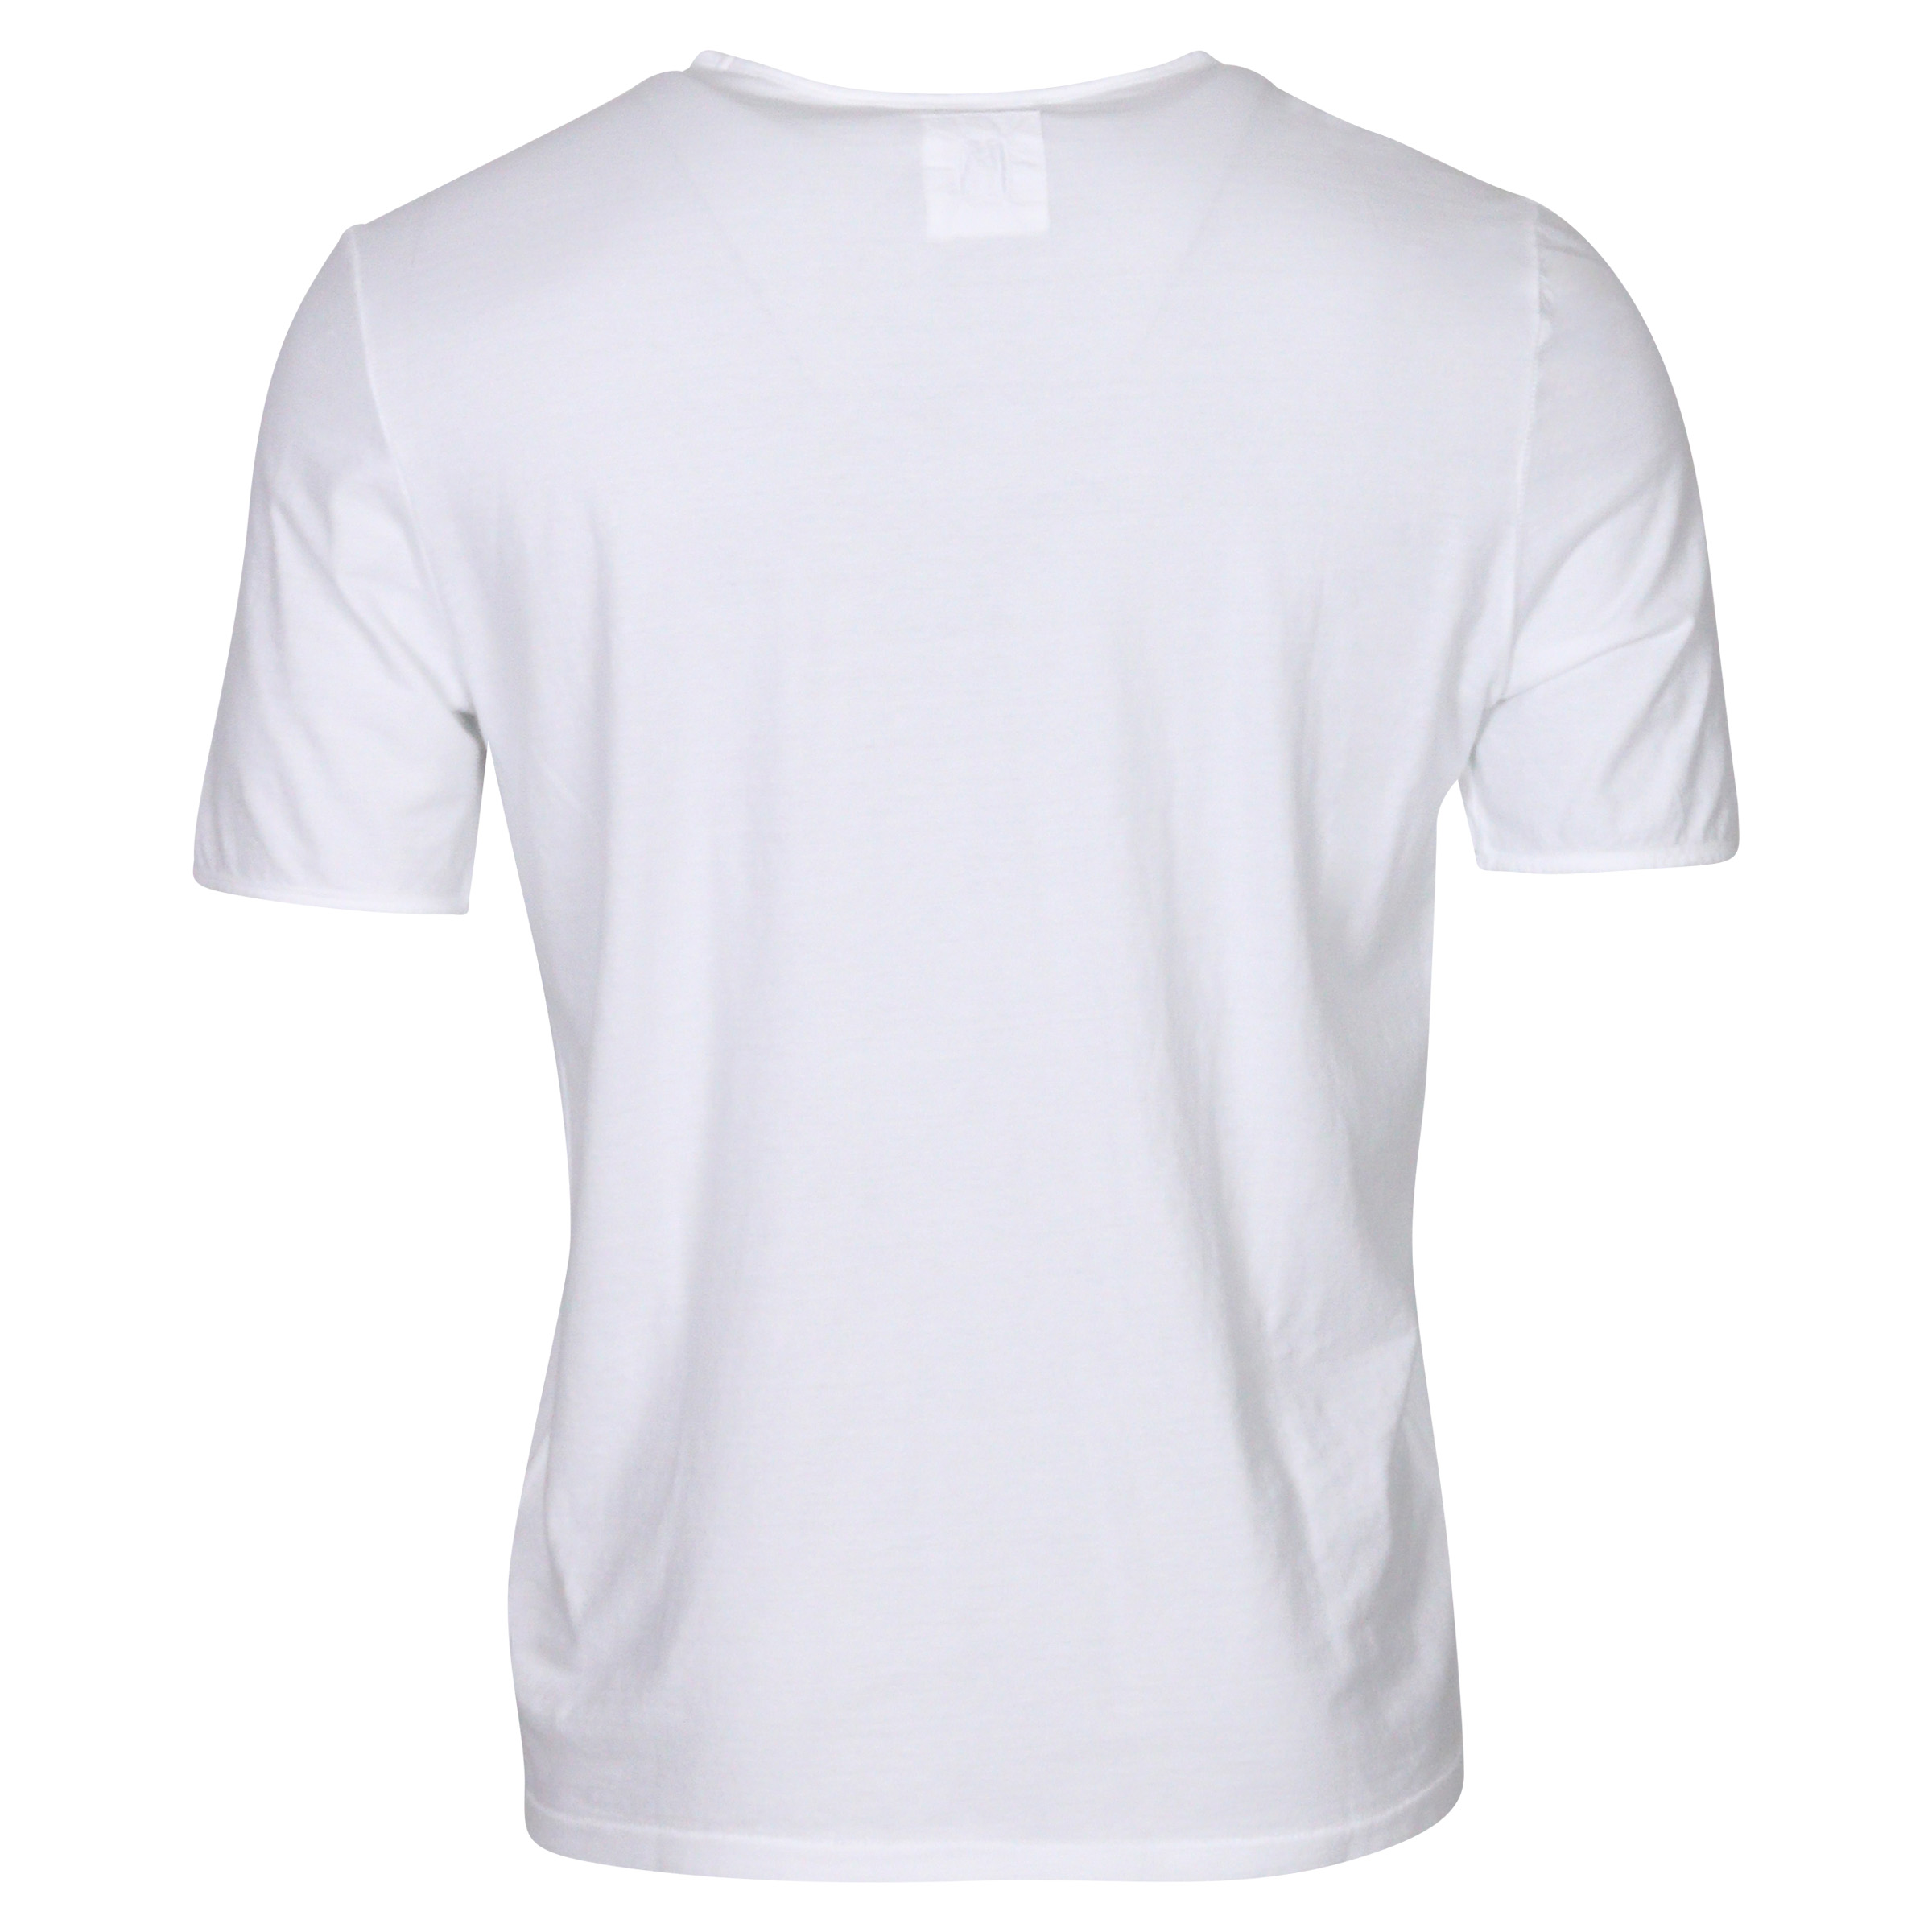 Hannes Roether T-Shirt White XL